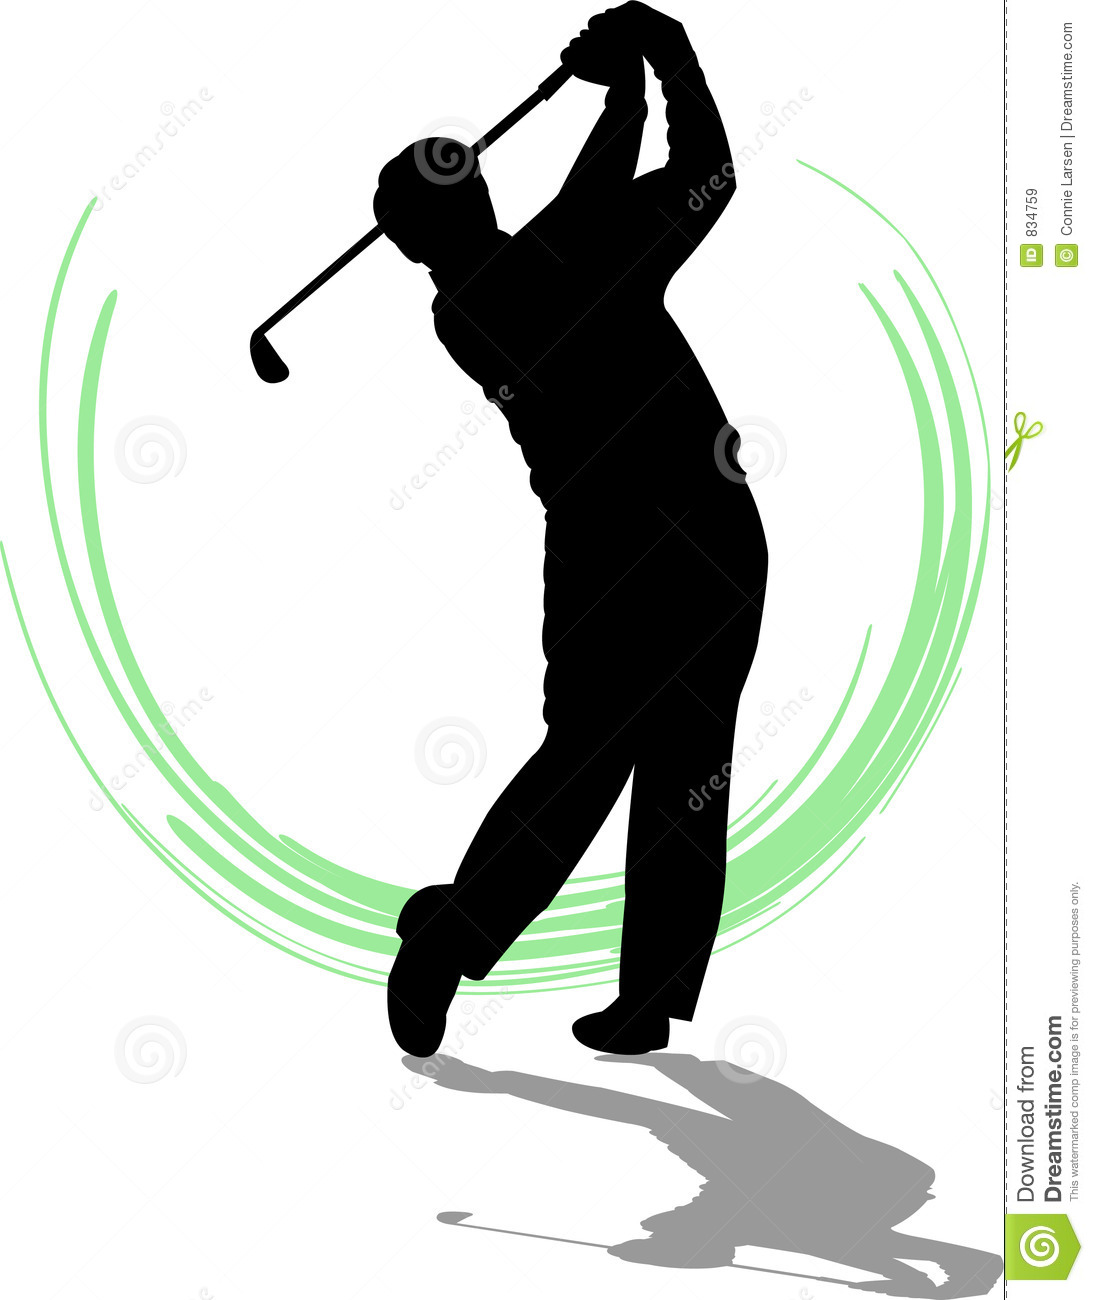 Golfer Silhouette Clip Art at Free for